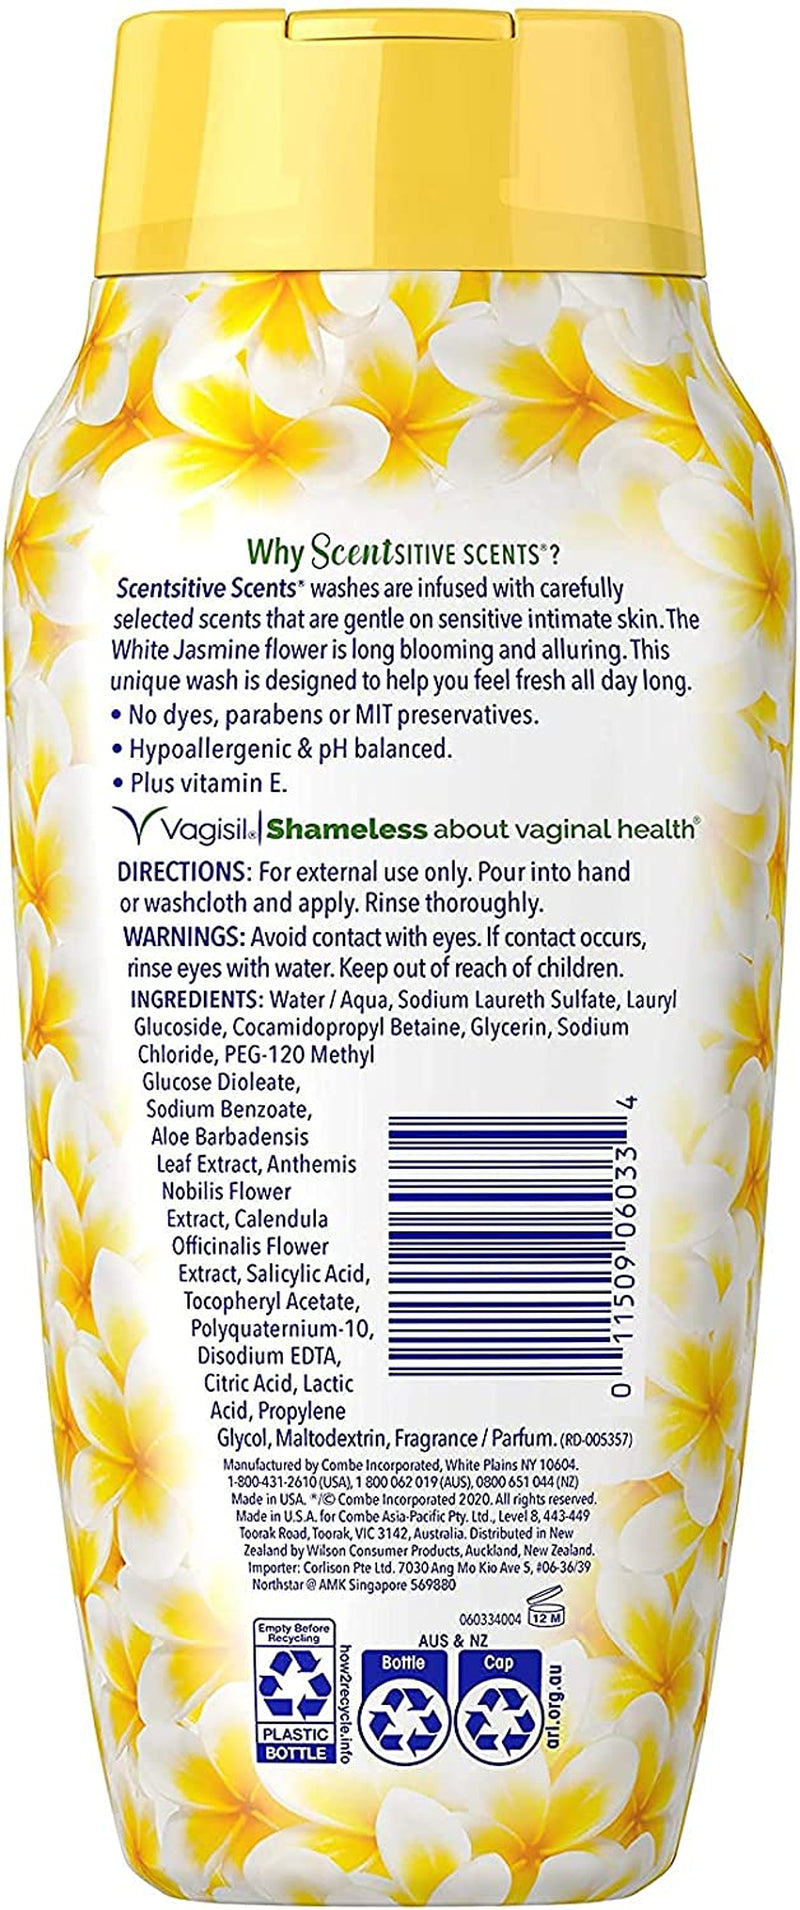 Vagisil Feminine Wash for Intimate Area Hygiene, Scentsitive Scents, Ph Balanced and Gynecologist Tested, White Jasmine, 12 Oz (Pack of 3)